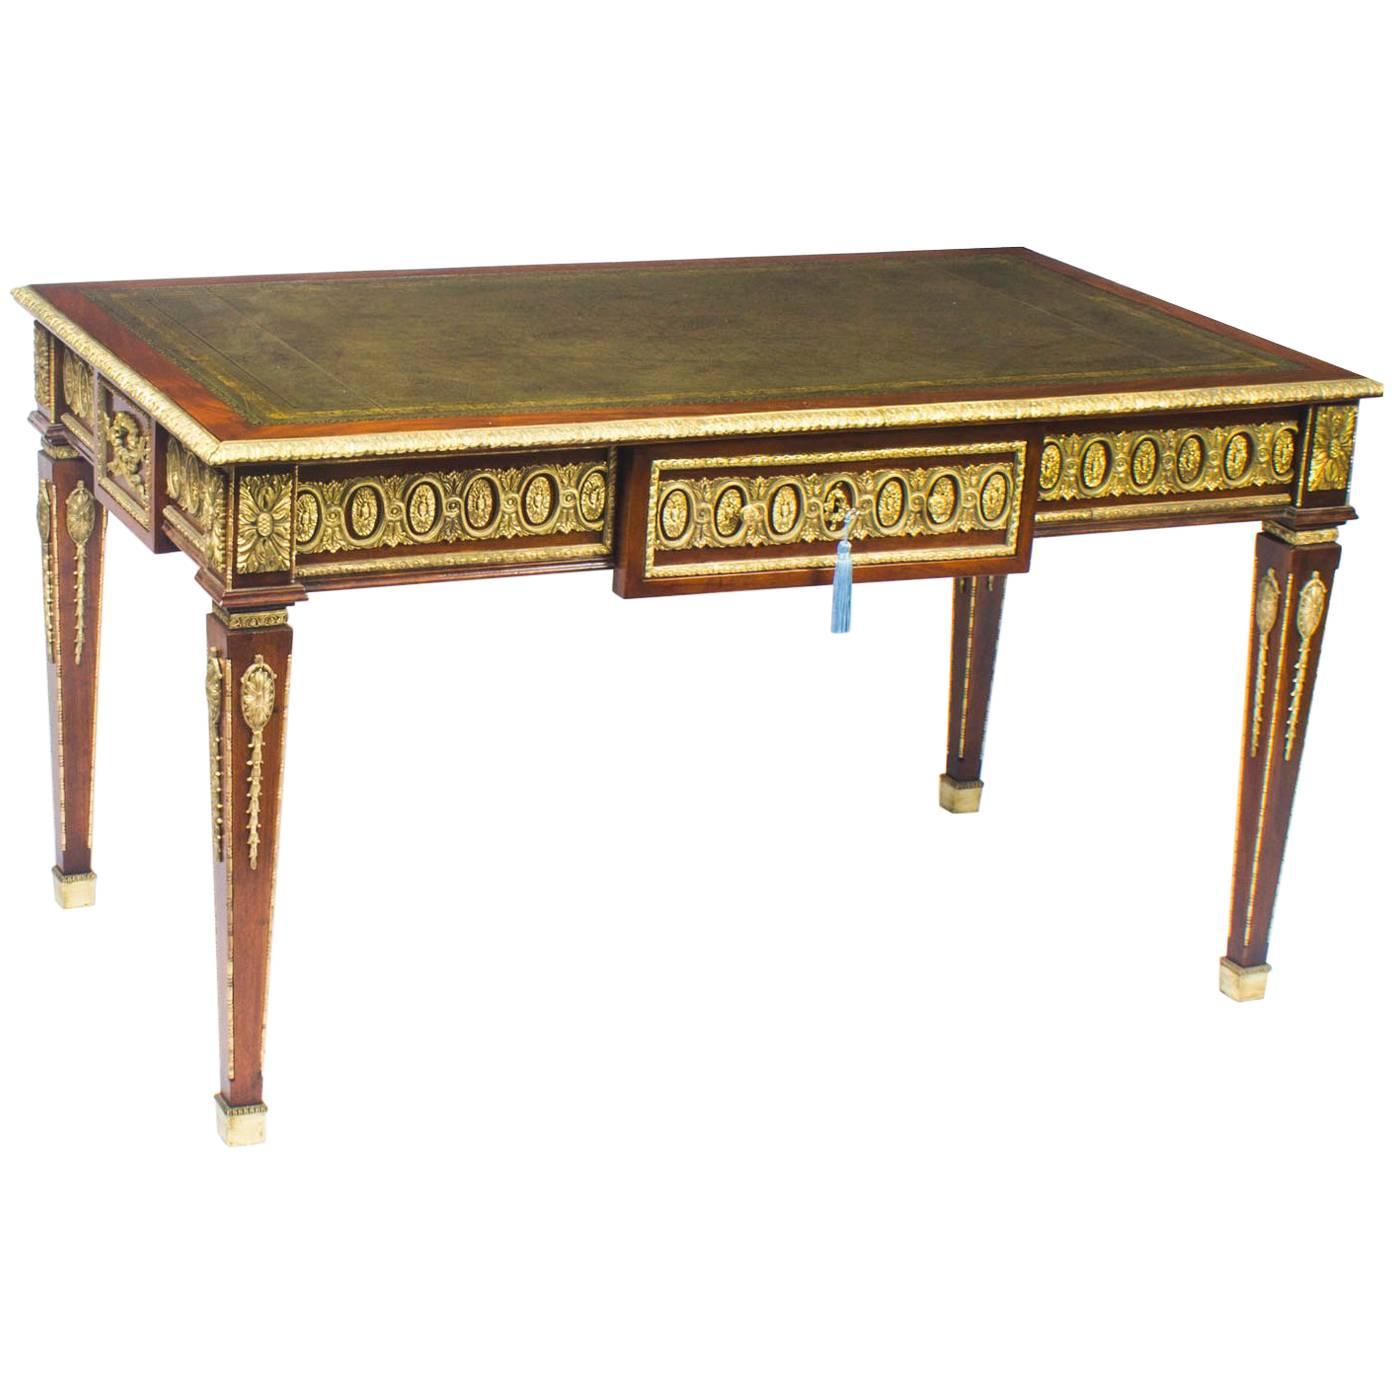 Early 20th Century French Empire Revival Bureau Plat Desk Writing Table